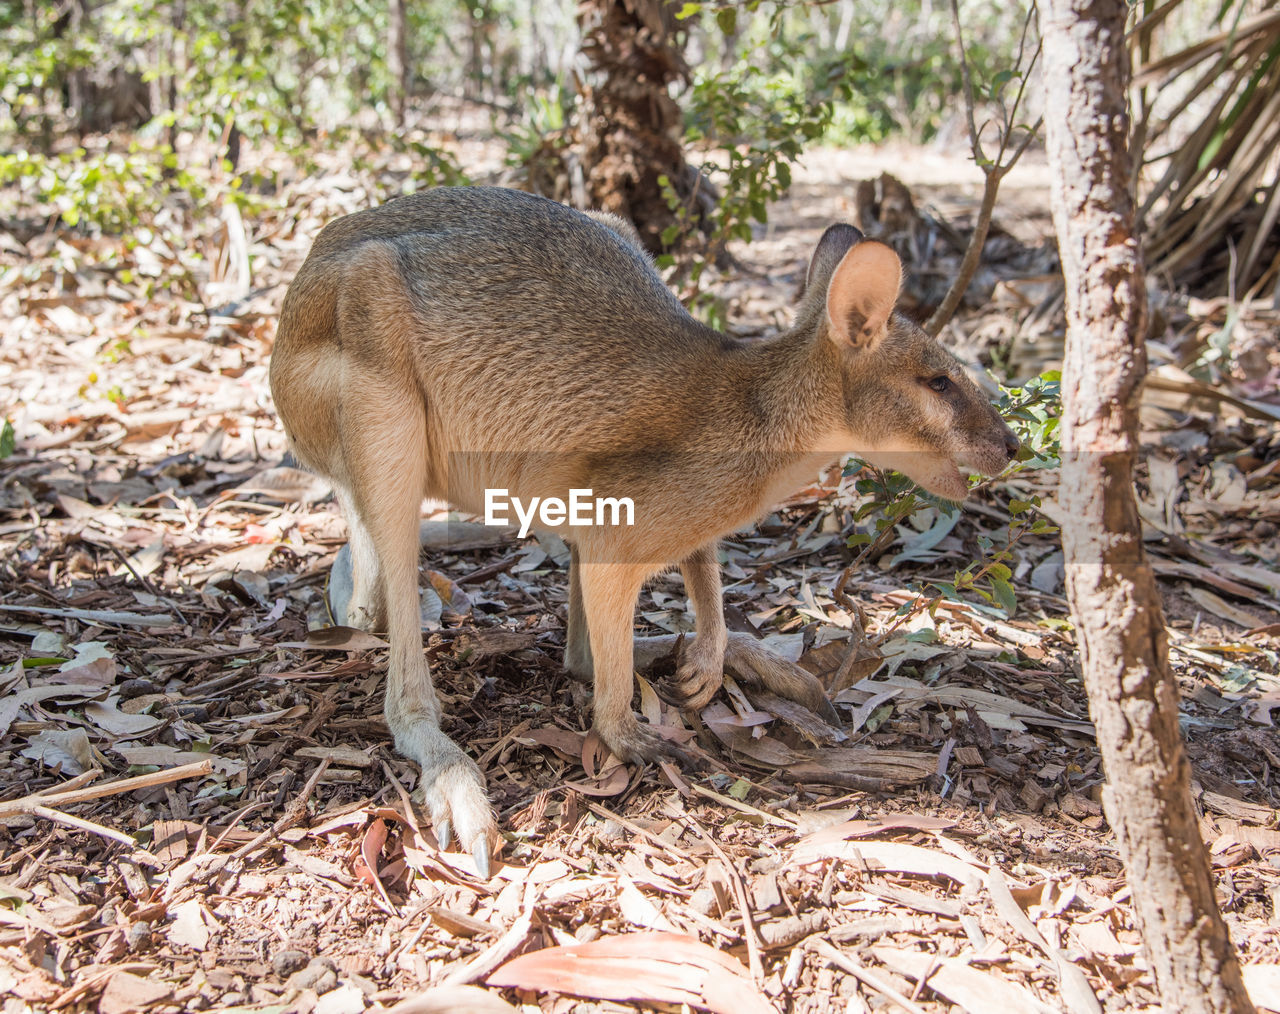 Wallaby in a forest